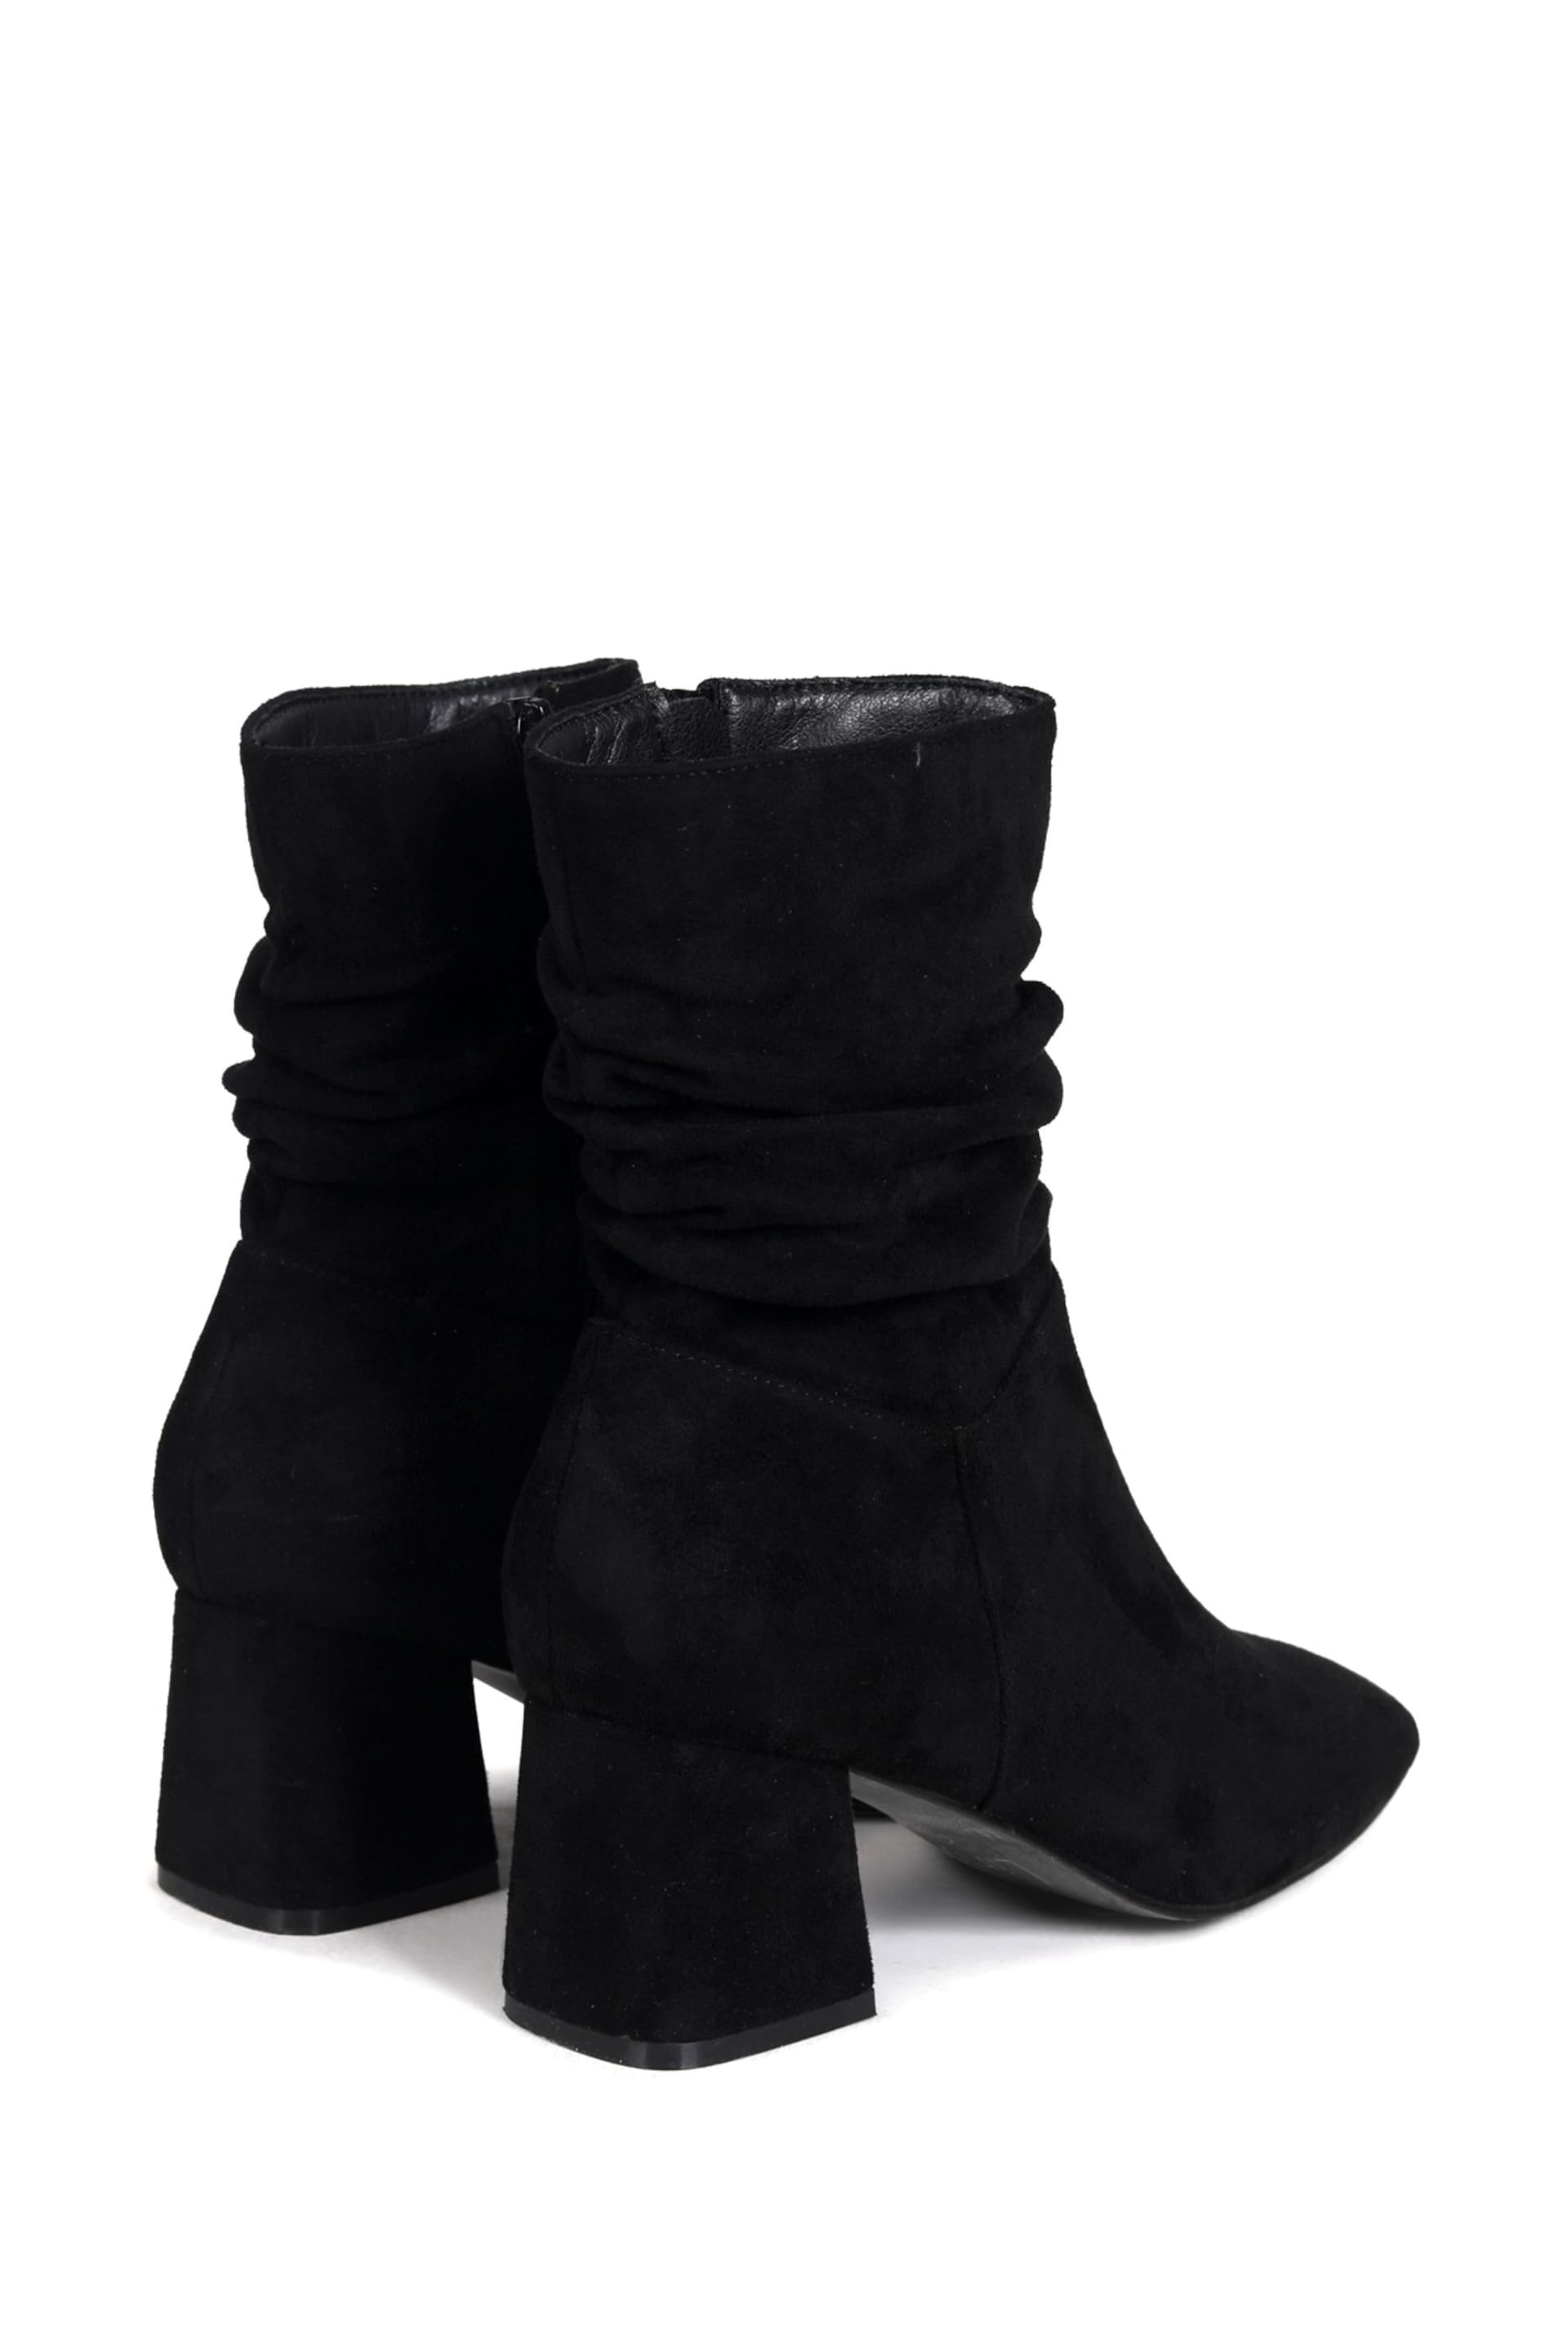 Linzi Black Aster Ruched Heeled Ankle Boots - Image 5 of 5